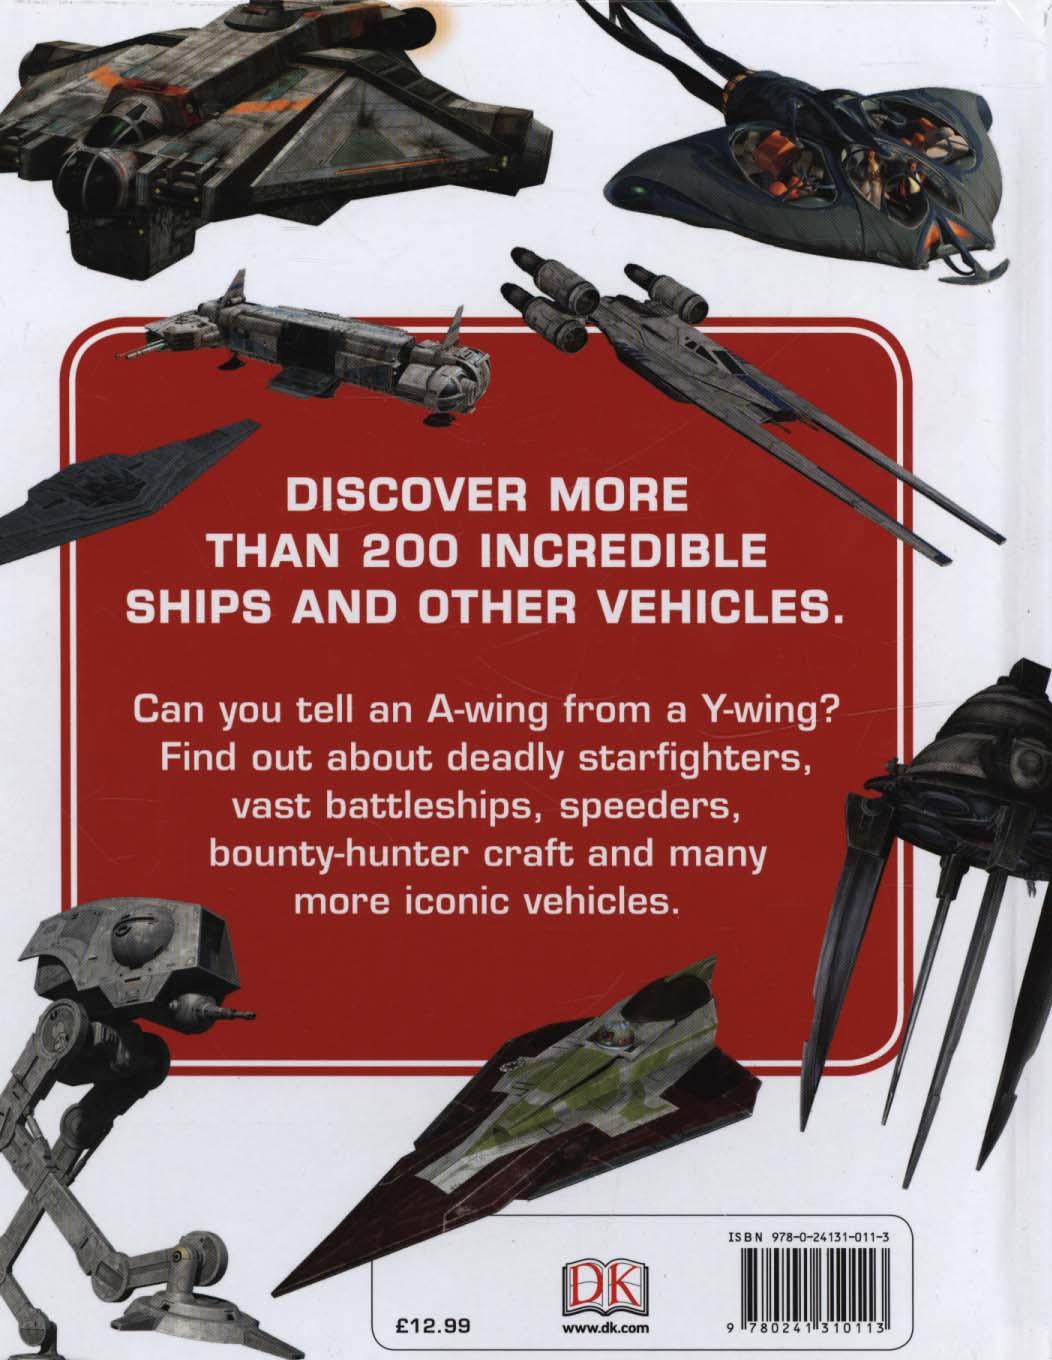 Star Wars (TM) Encyclopedia of Starfighters and Other Vehicl